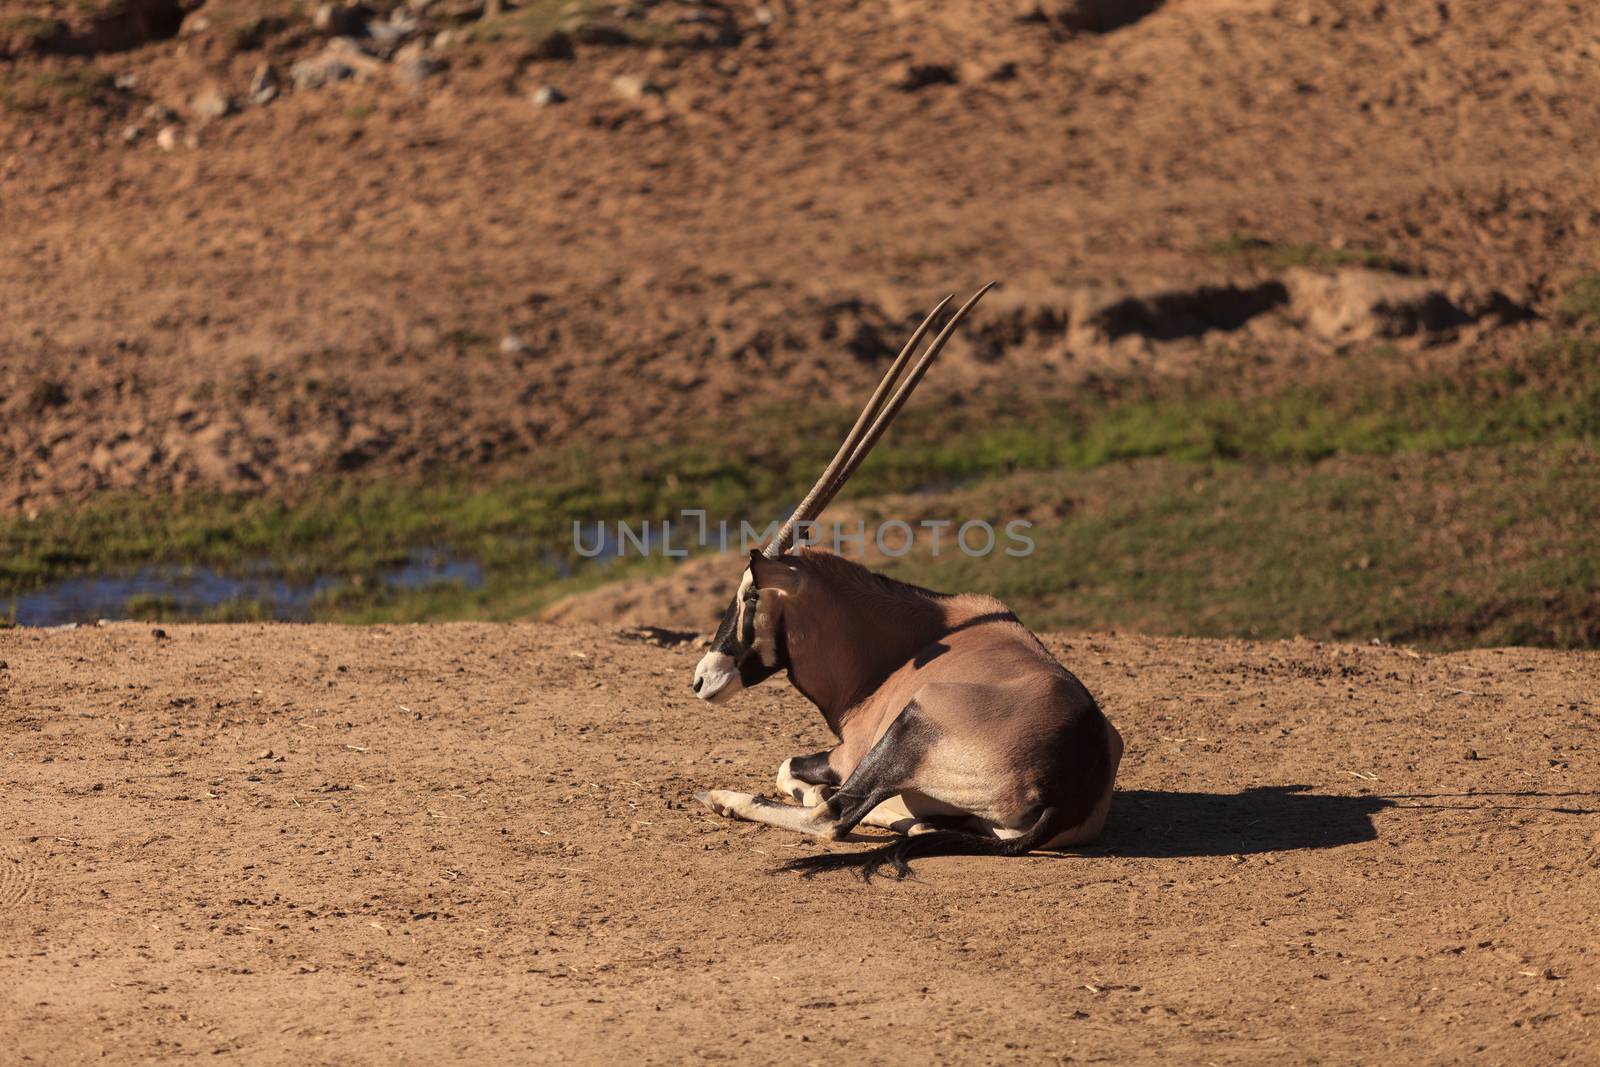 Gemsbok, Oryx gazelle, is golden brown with a face mask and horns, and can be found in South Africa